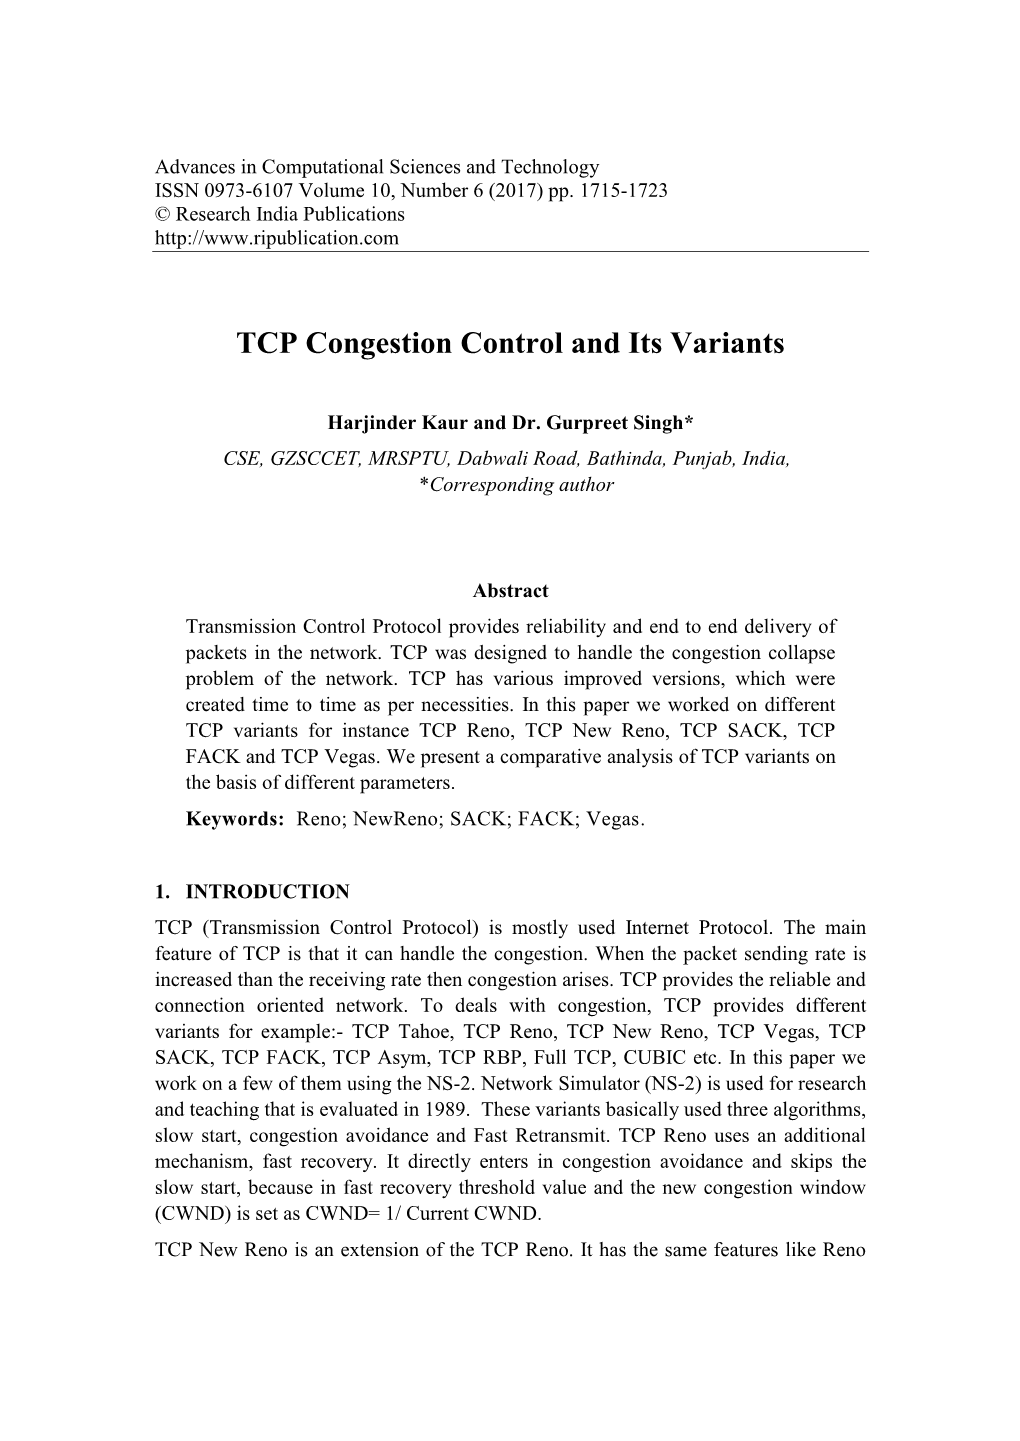 TCP Congestion Control and Its Variants